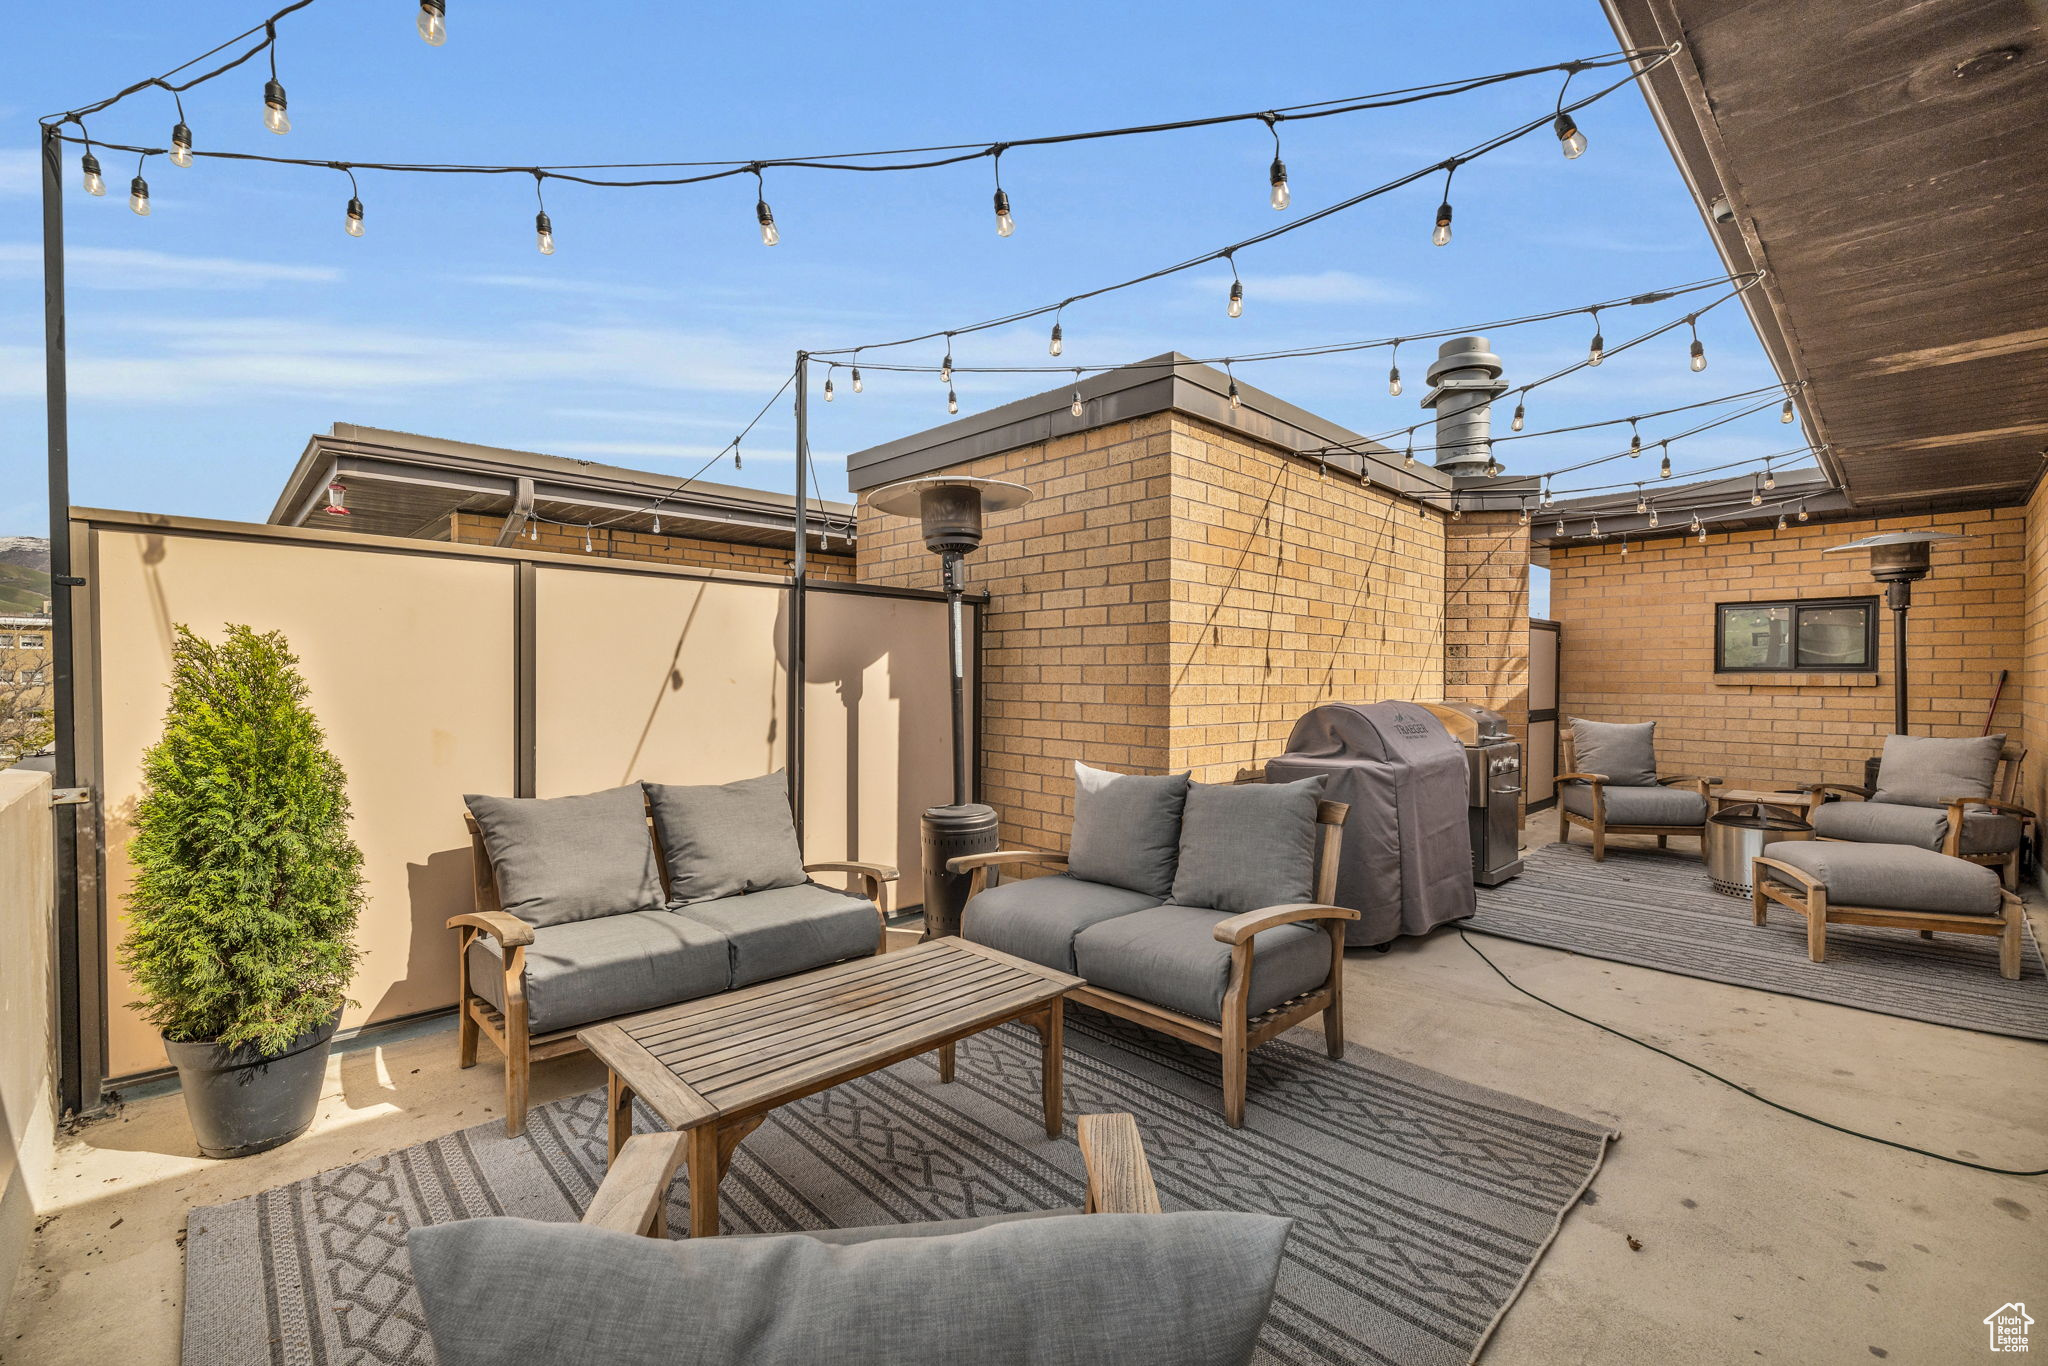 700 Sq Ft open-air private terrace with an outdoor living space with cafe lights, and fantastic views of the city and sunset